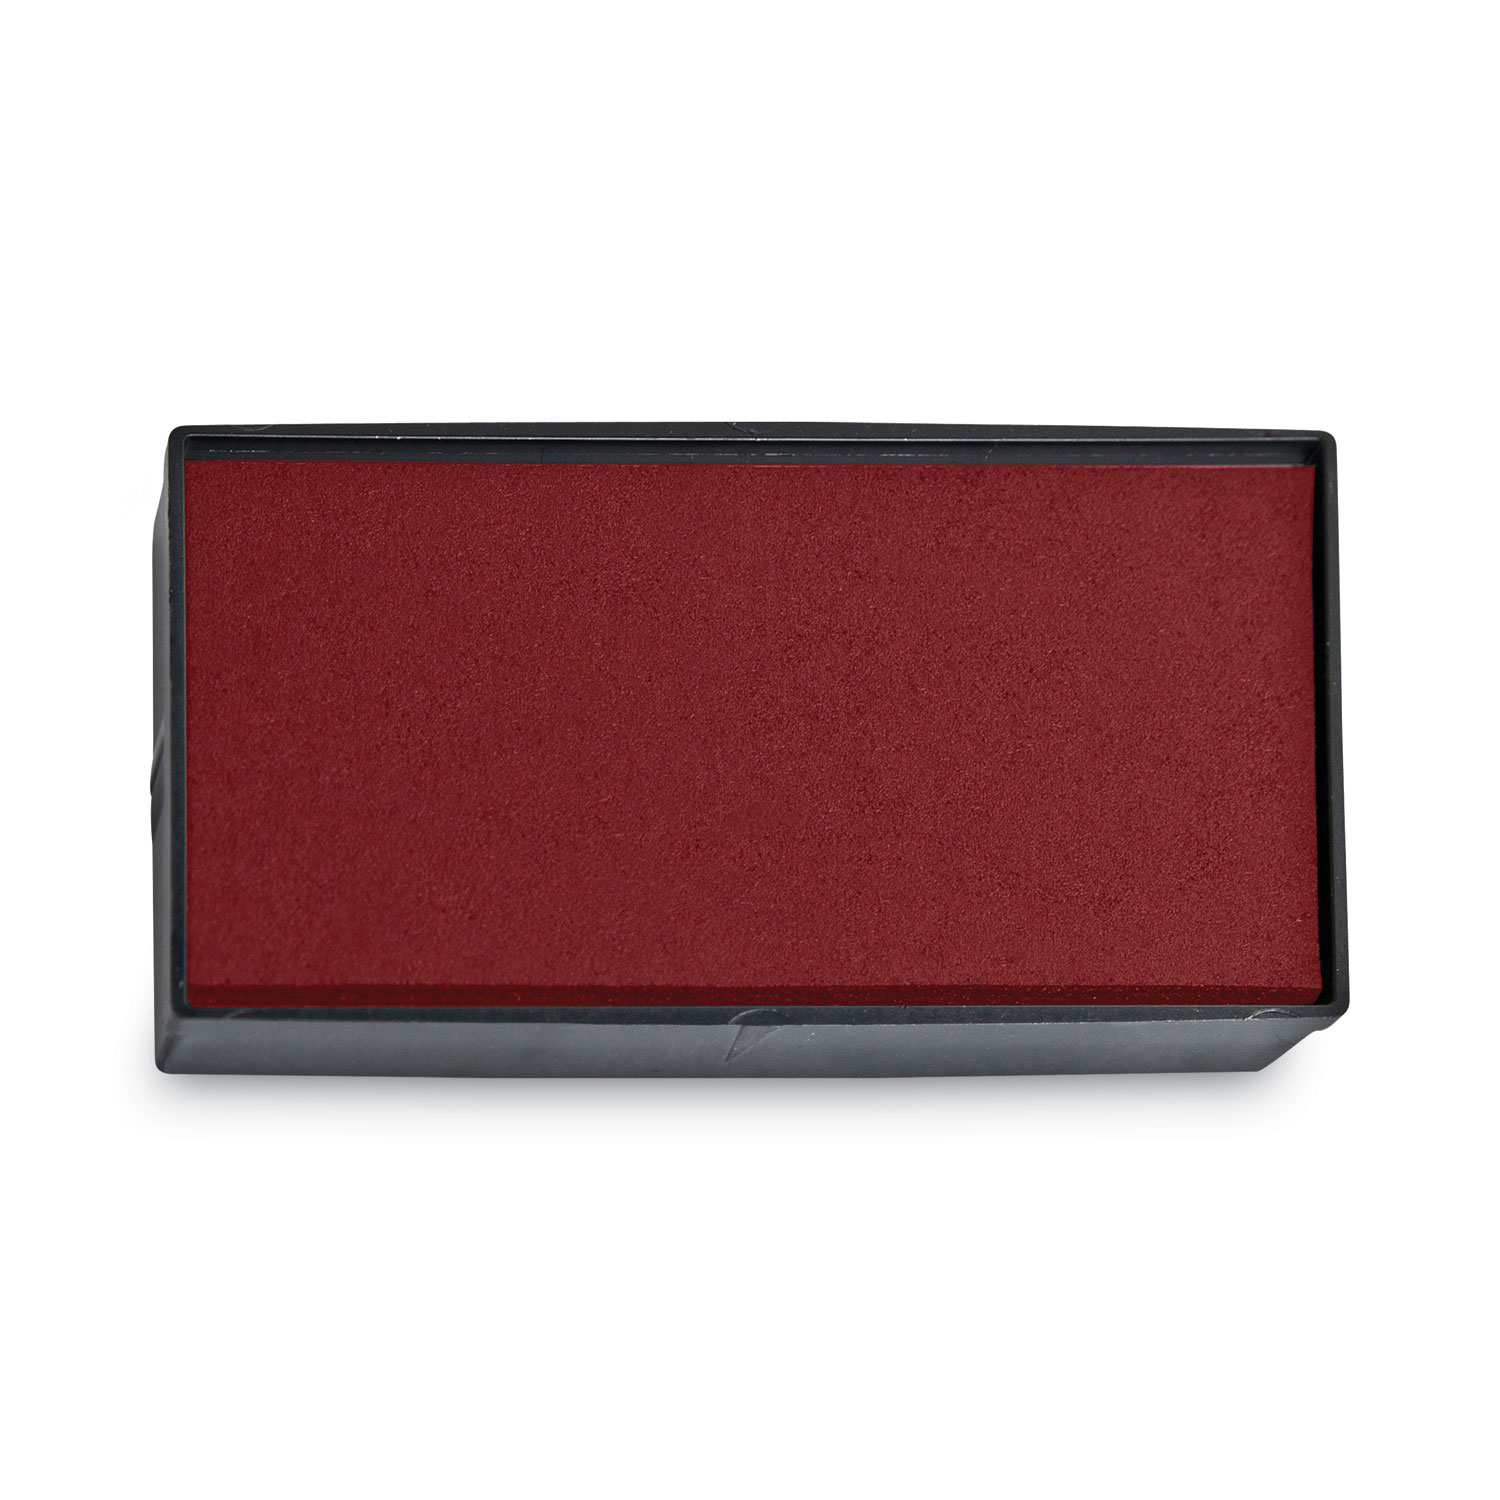 Replacement Ink Pad for 2000PLUS 1SI30PGL, 1.94 x 0.25, Red - BOSS Office  and Computer Products